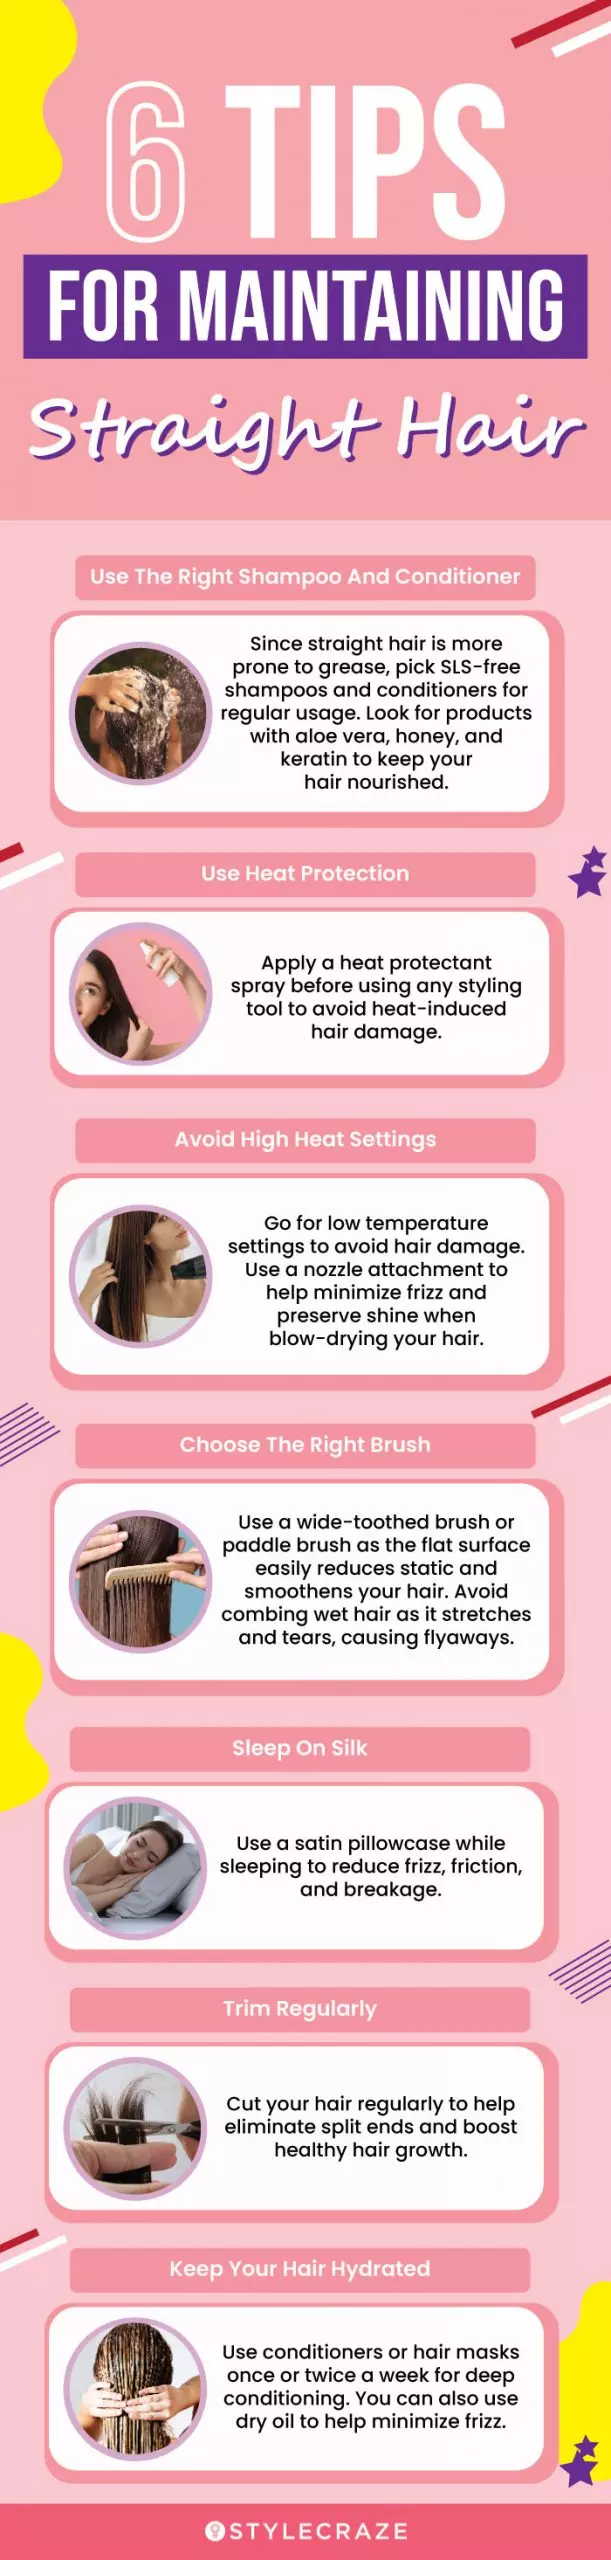 6 tips for maintaining straight hair (infographic)